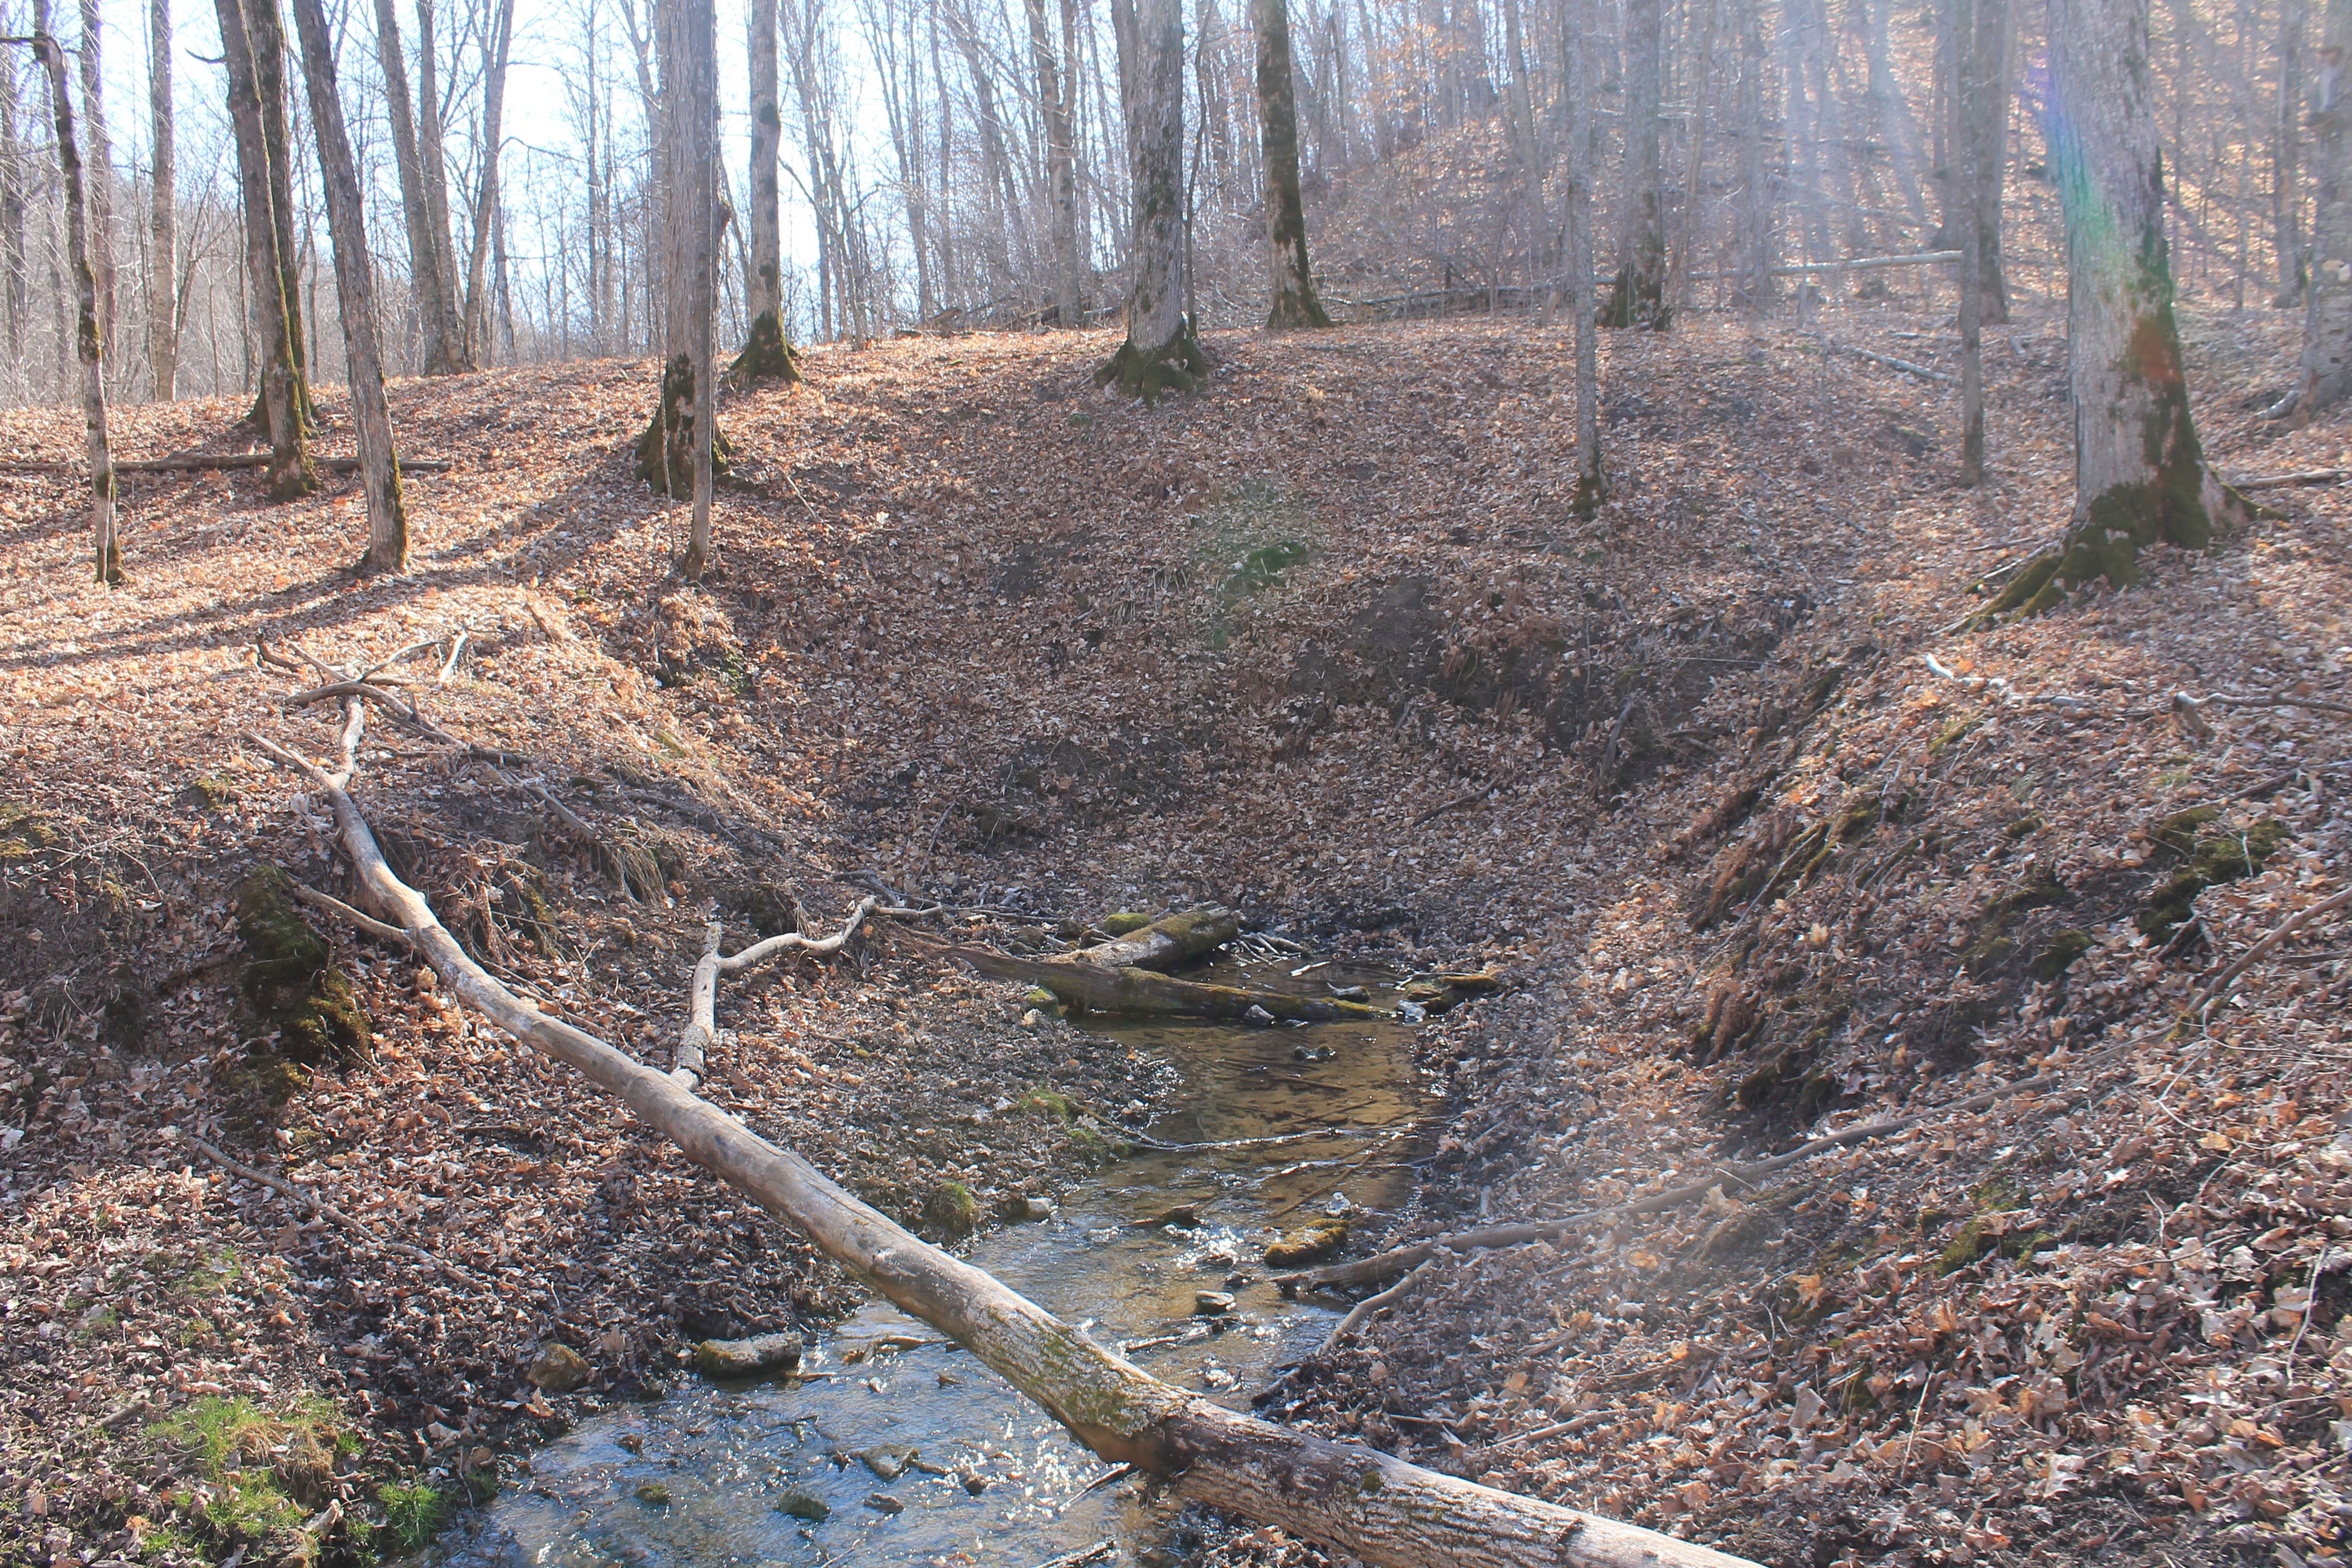 One of the many springs where ground water out flows to form the head waters of Wilson Creek. The current flow is lower than normal due to the extended drought.  The lack of snow cover and subsequent snow melt means much of the seasonal recharging of the water table will not occur.  Surface waters and shallow wells will have less water this summer.